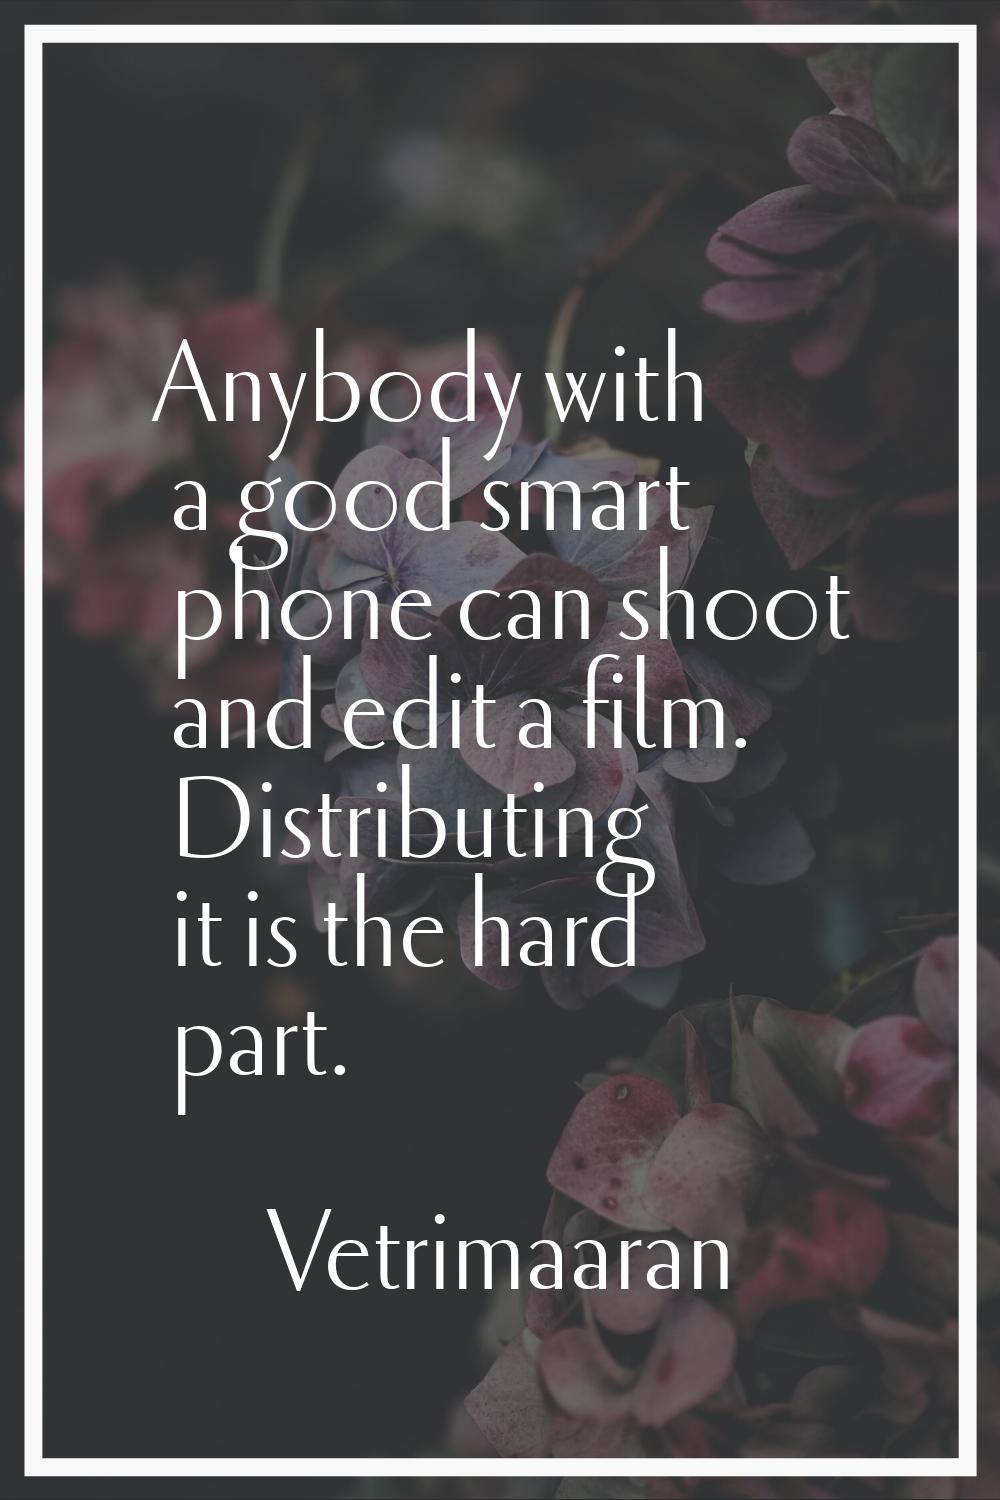 Anybody with a good smart phone can shoot and edit a film. Distributing it is the hard part.